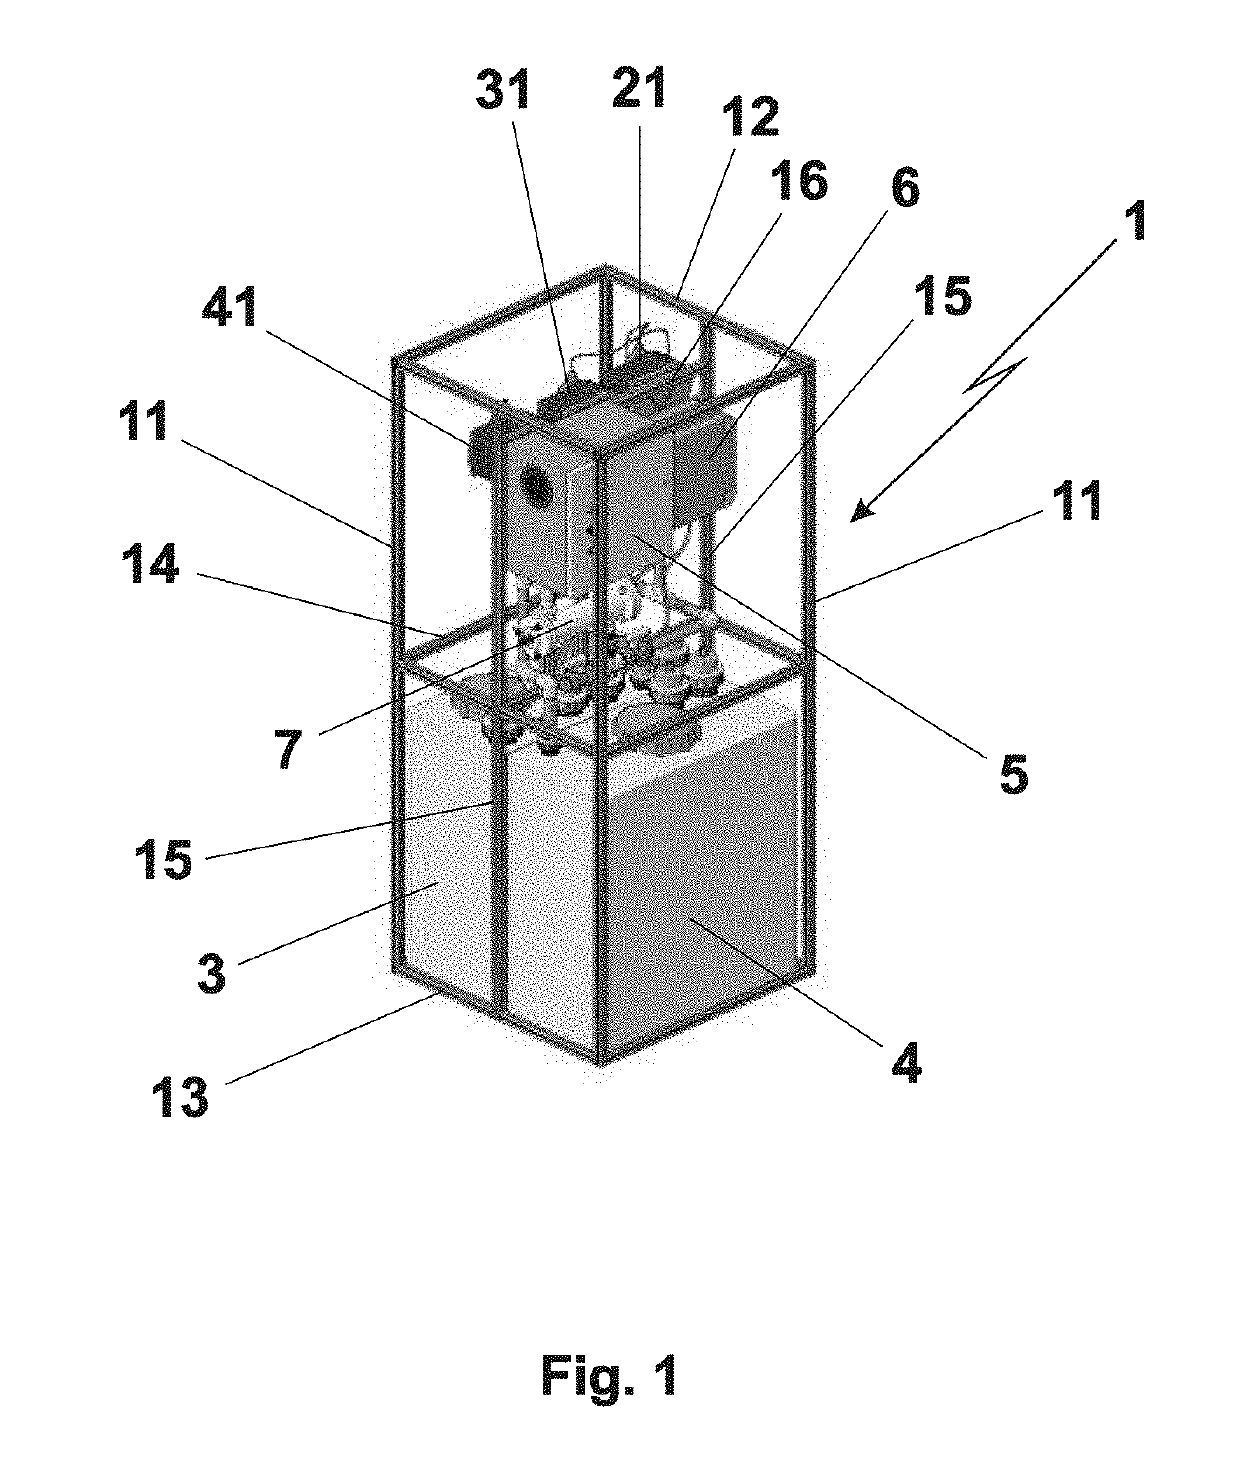 Constructive arrangement introduced in an oxidizing solution generator